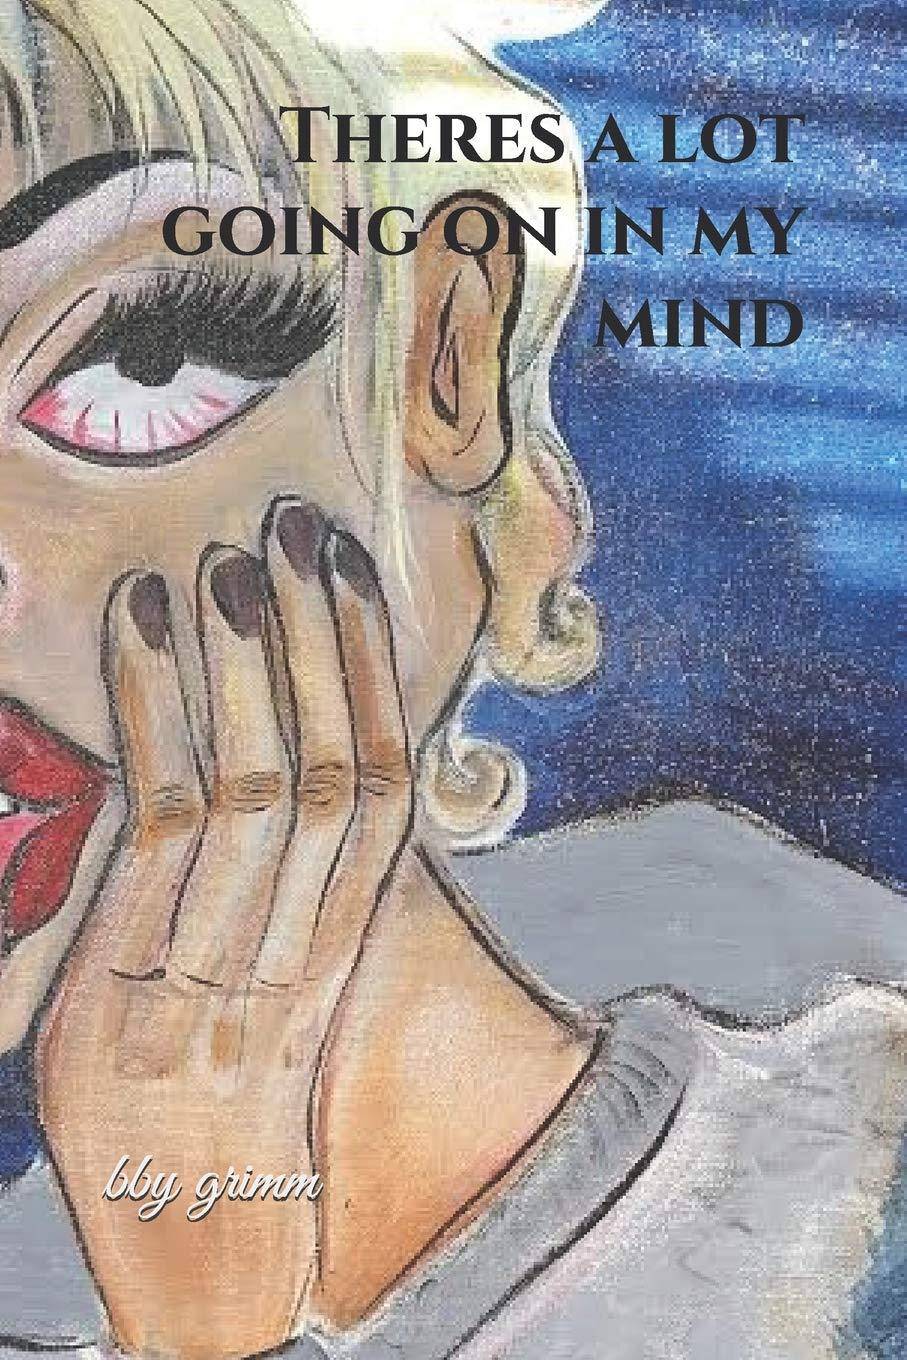 Theres a lot going on in my mind - SureShot Books Publishing LLC